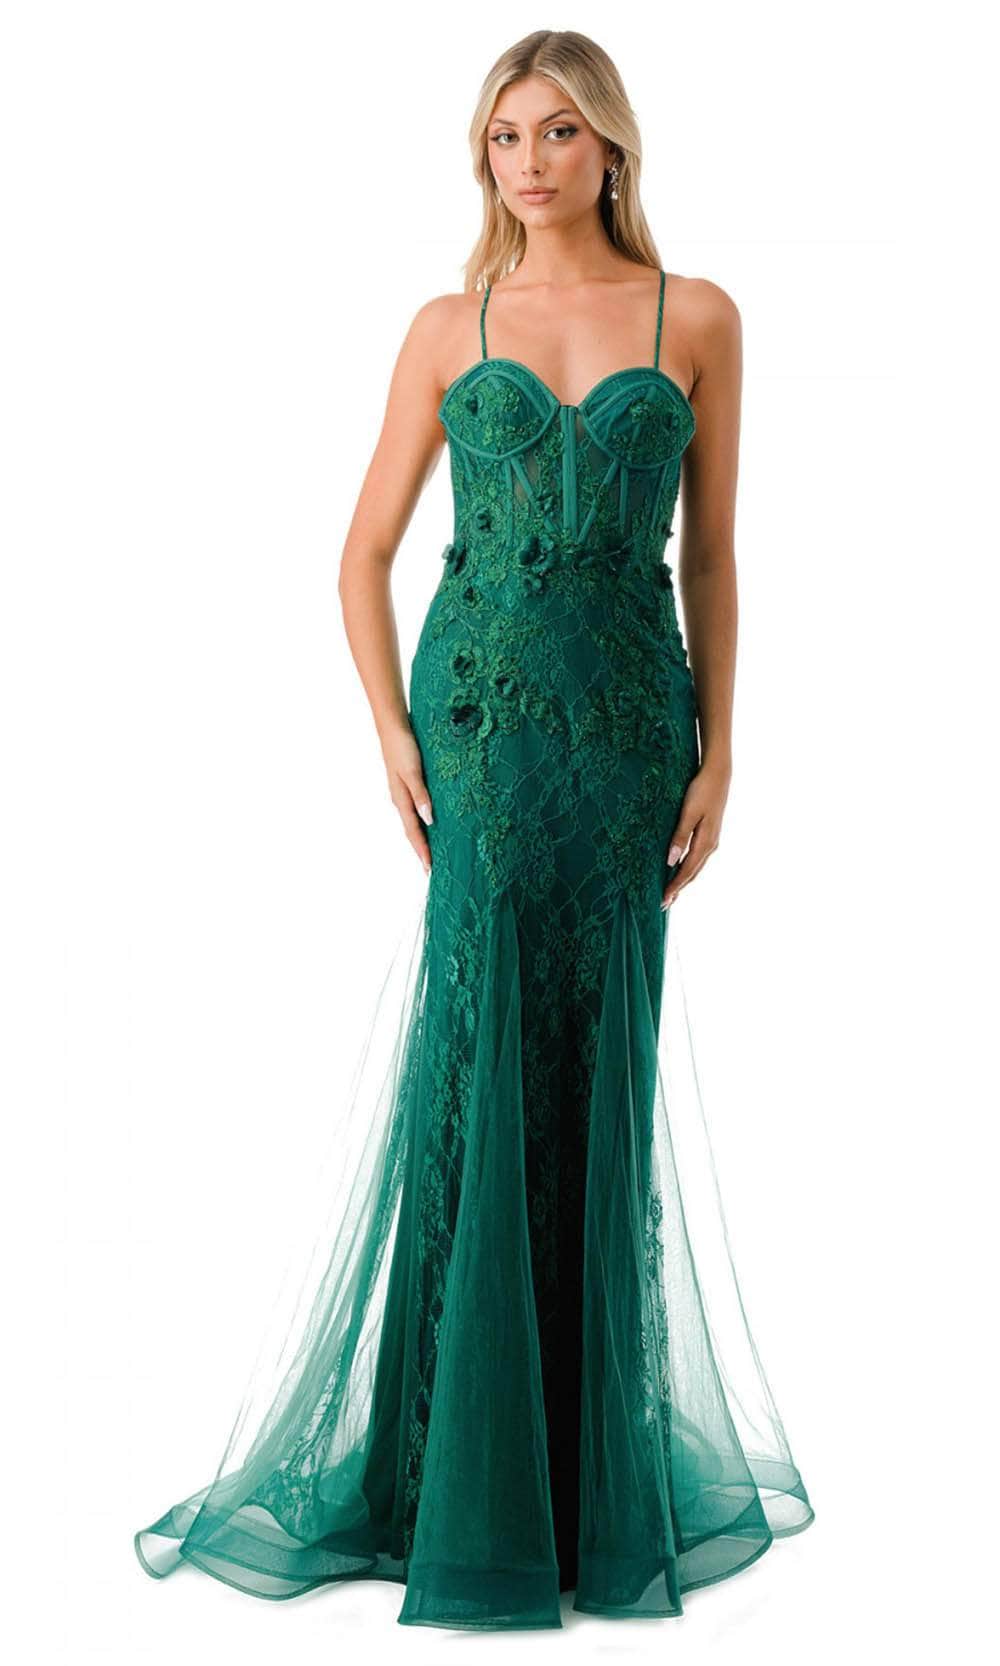 Aspeed Design P2120 - Bustier Bodice Prom Gown XS / Emerald